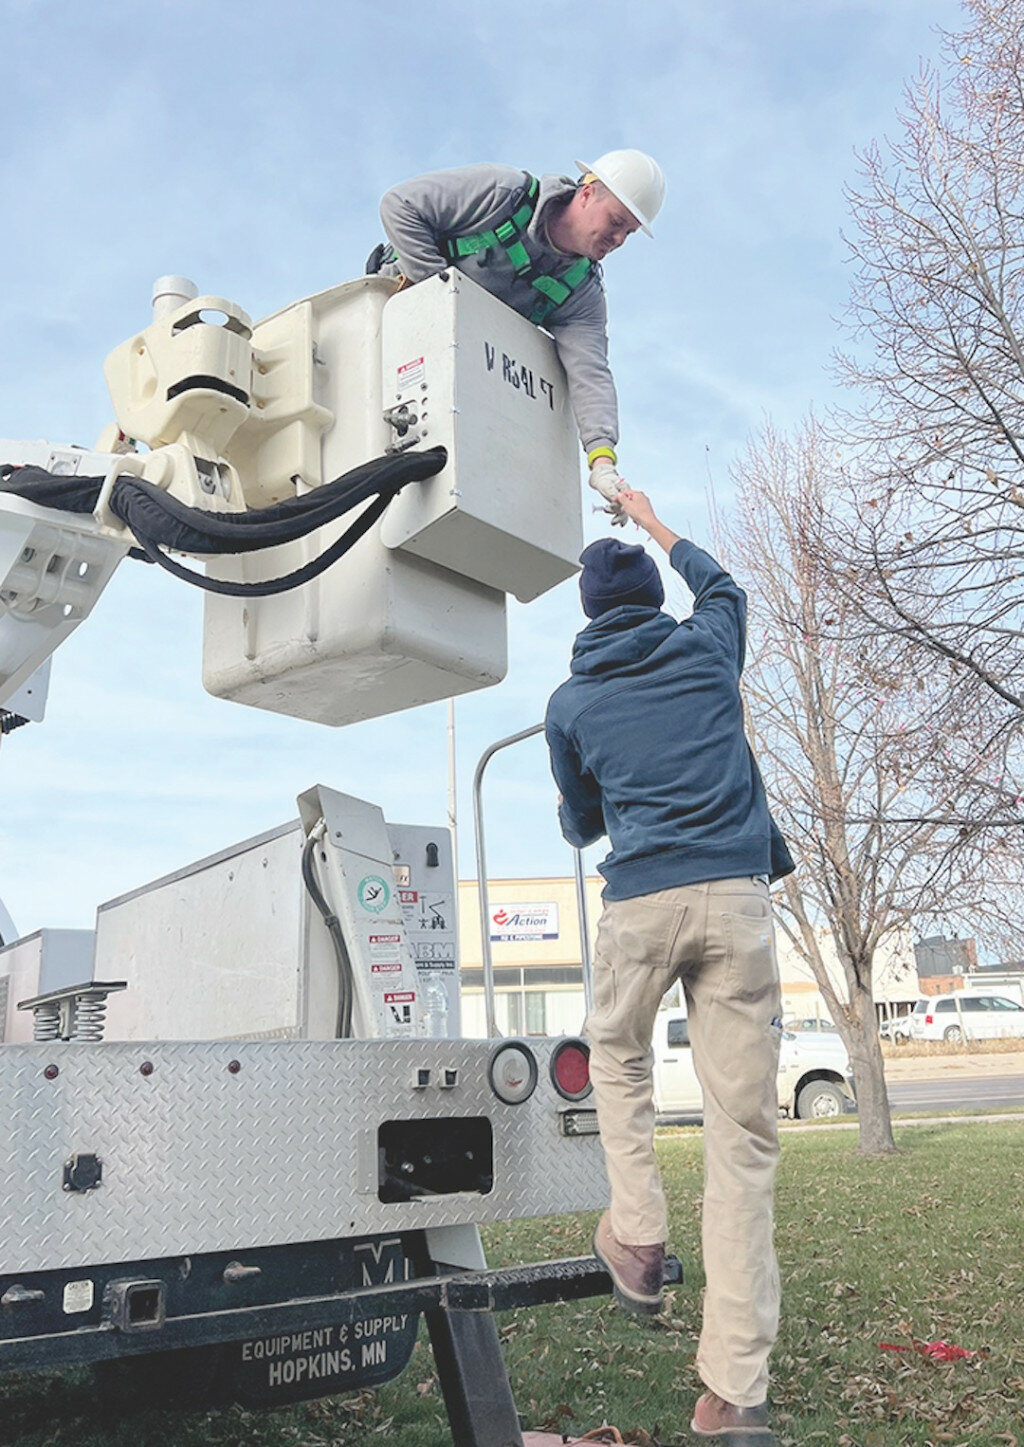 The weather couldn’t have been better this past week for volunteers, local business leaders, and city employees, to string up holiday lights in early November. Temperatures hovered around 50 degrees throughout the day. Jaymes Zollner, new in the past year to the team with the City of Flandreau electrical department, handed light strings to Ryan Sherman, Flandreau City Electrical Supervisor as the two went tree by tree down the front walkway of the County Courthouse.